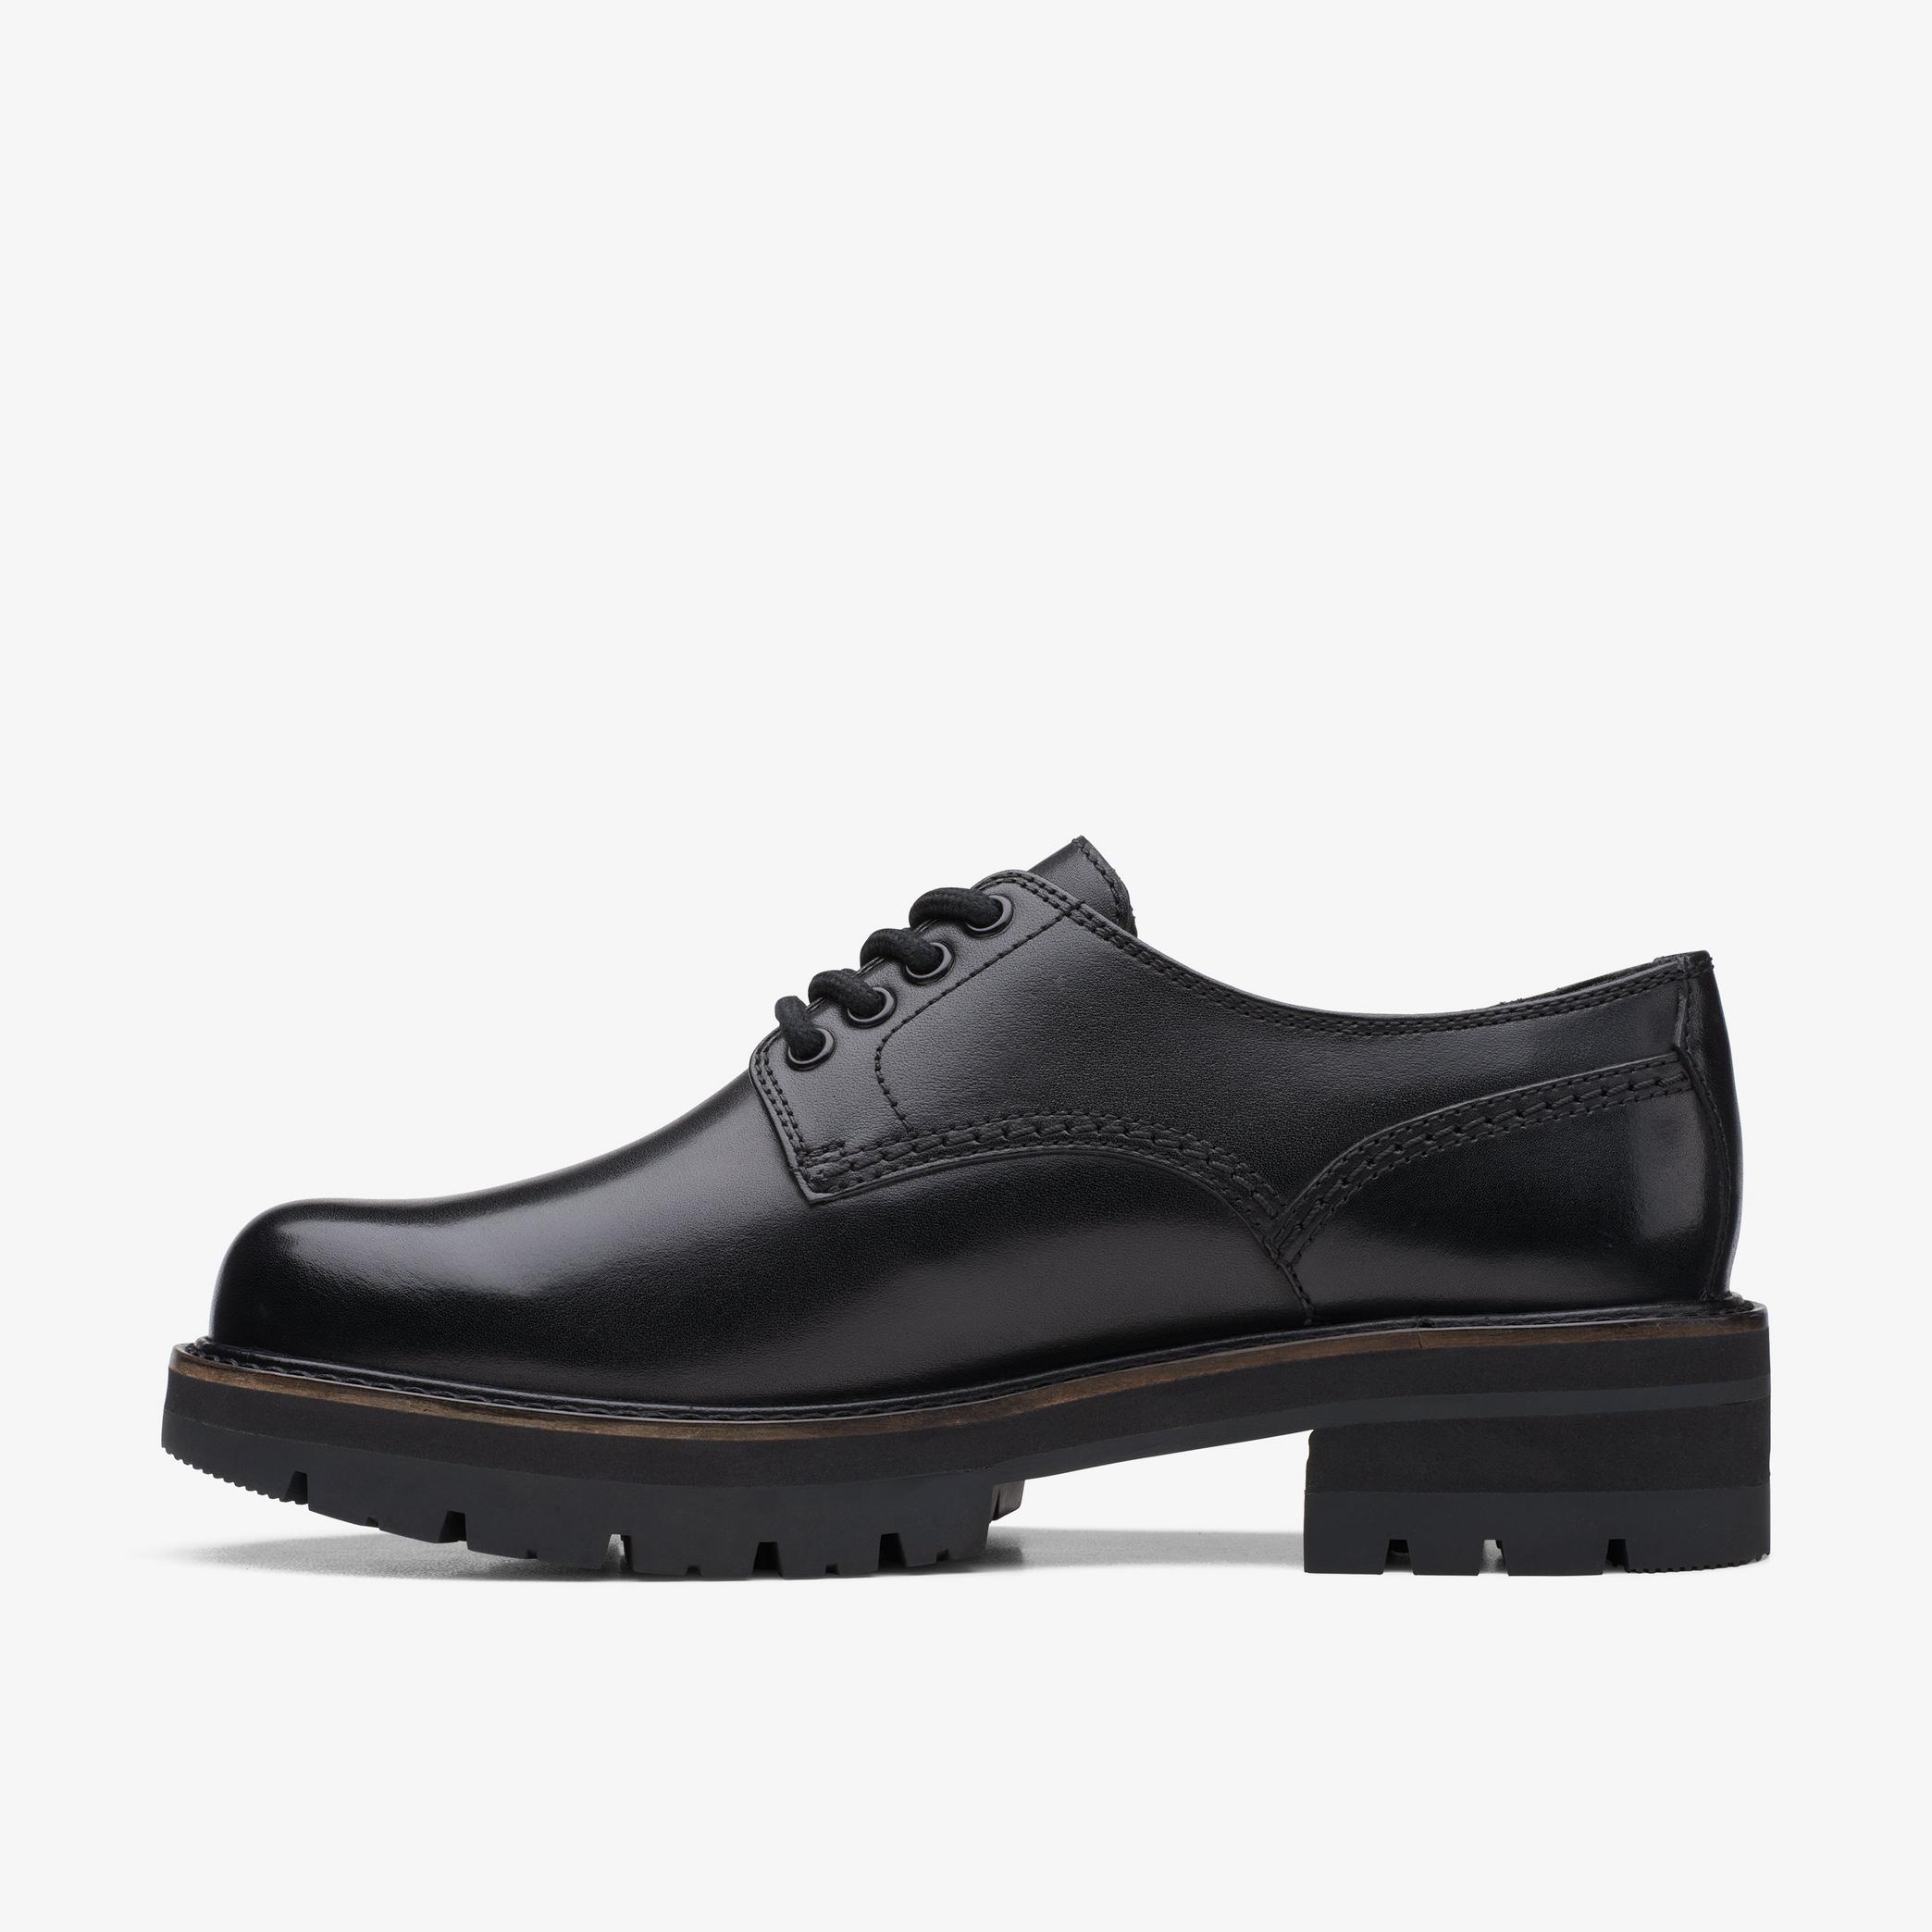 Orianna Derby Black Oxford Shoes, view 3 of 7